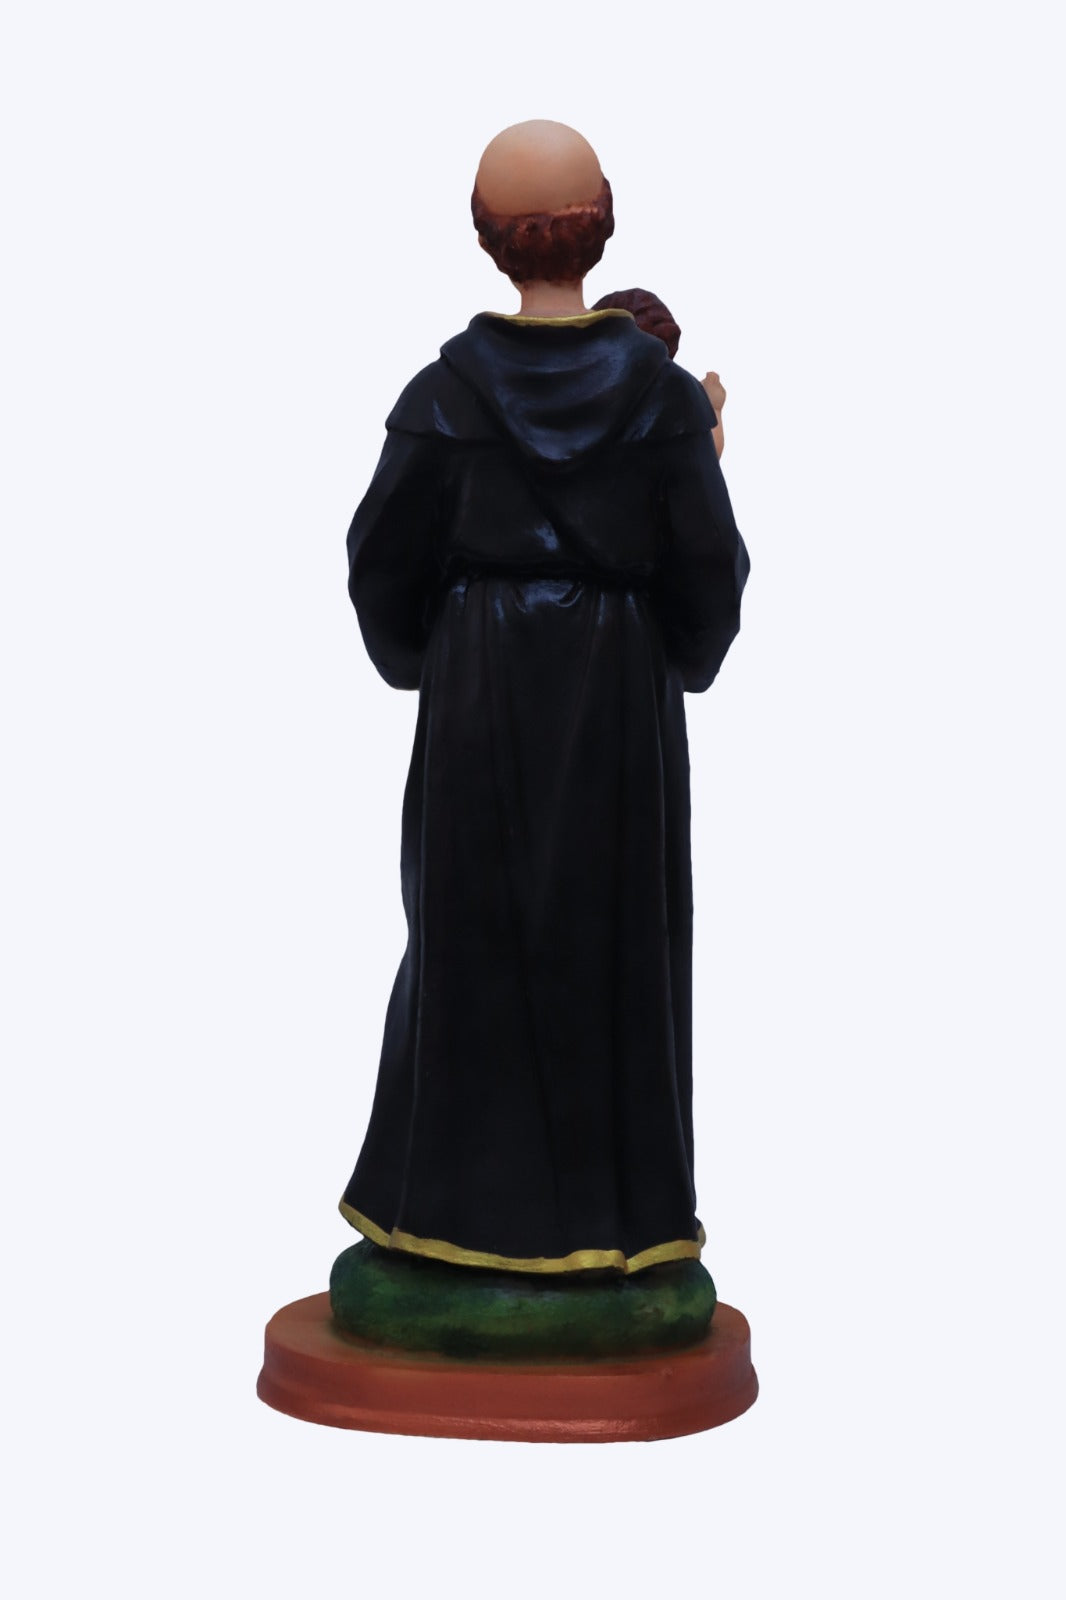 St. Anthony 12 Inch Statue | Living Words Christian Website